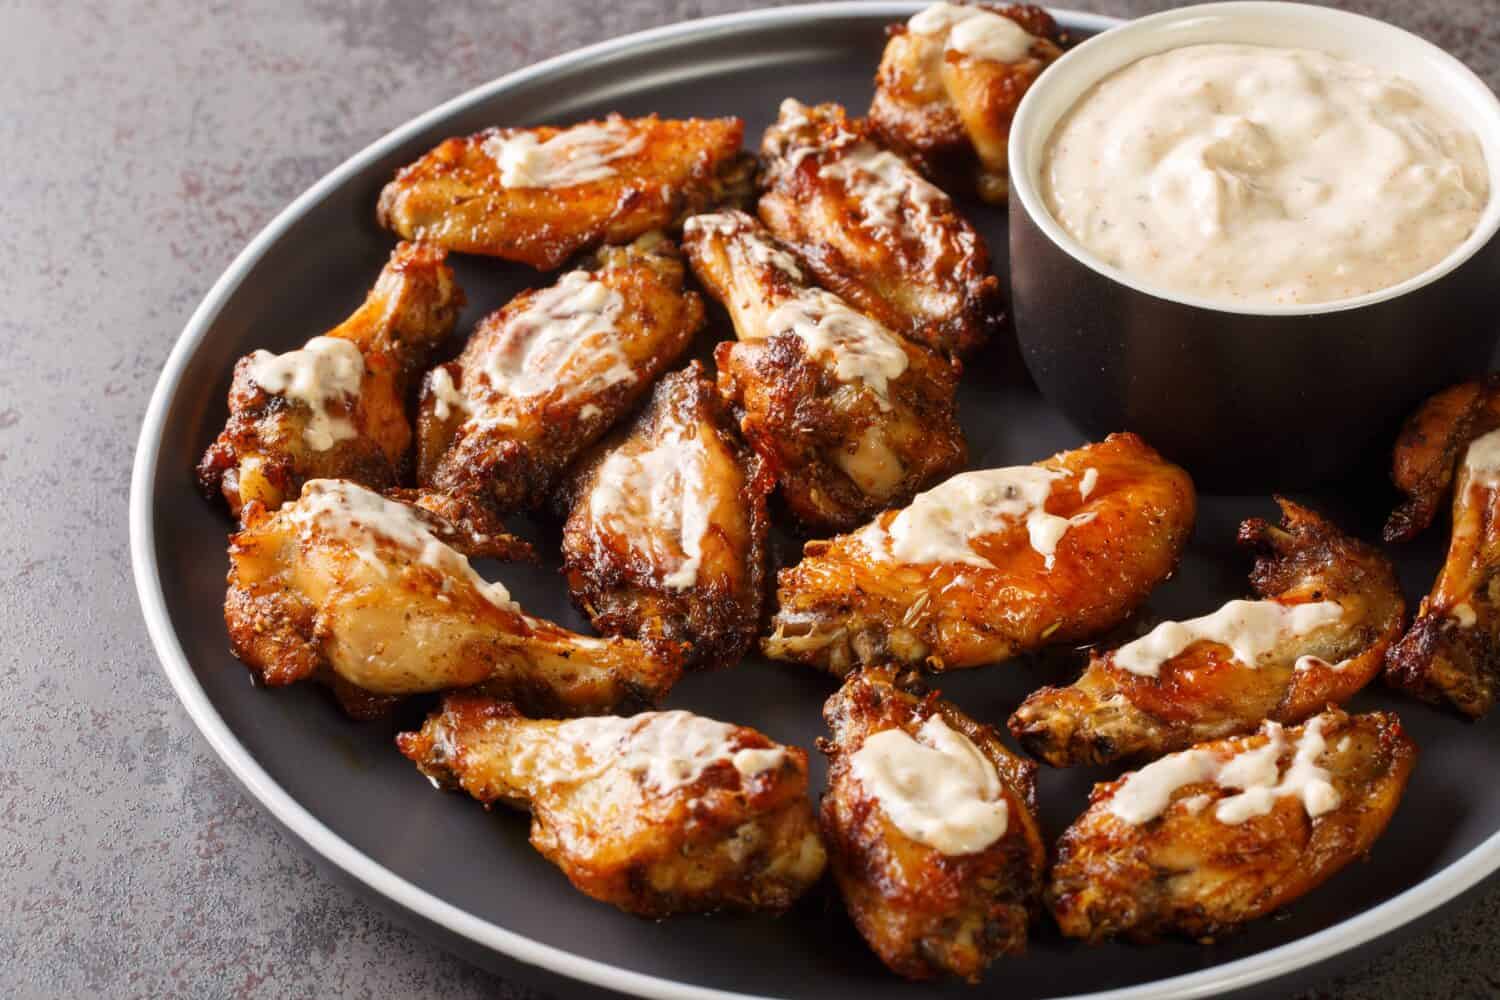 American Grilled Chicken Wings With Alabama White BBQ Sauce close-up in a plate on the table. Horizontal